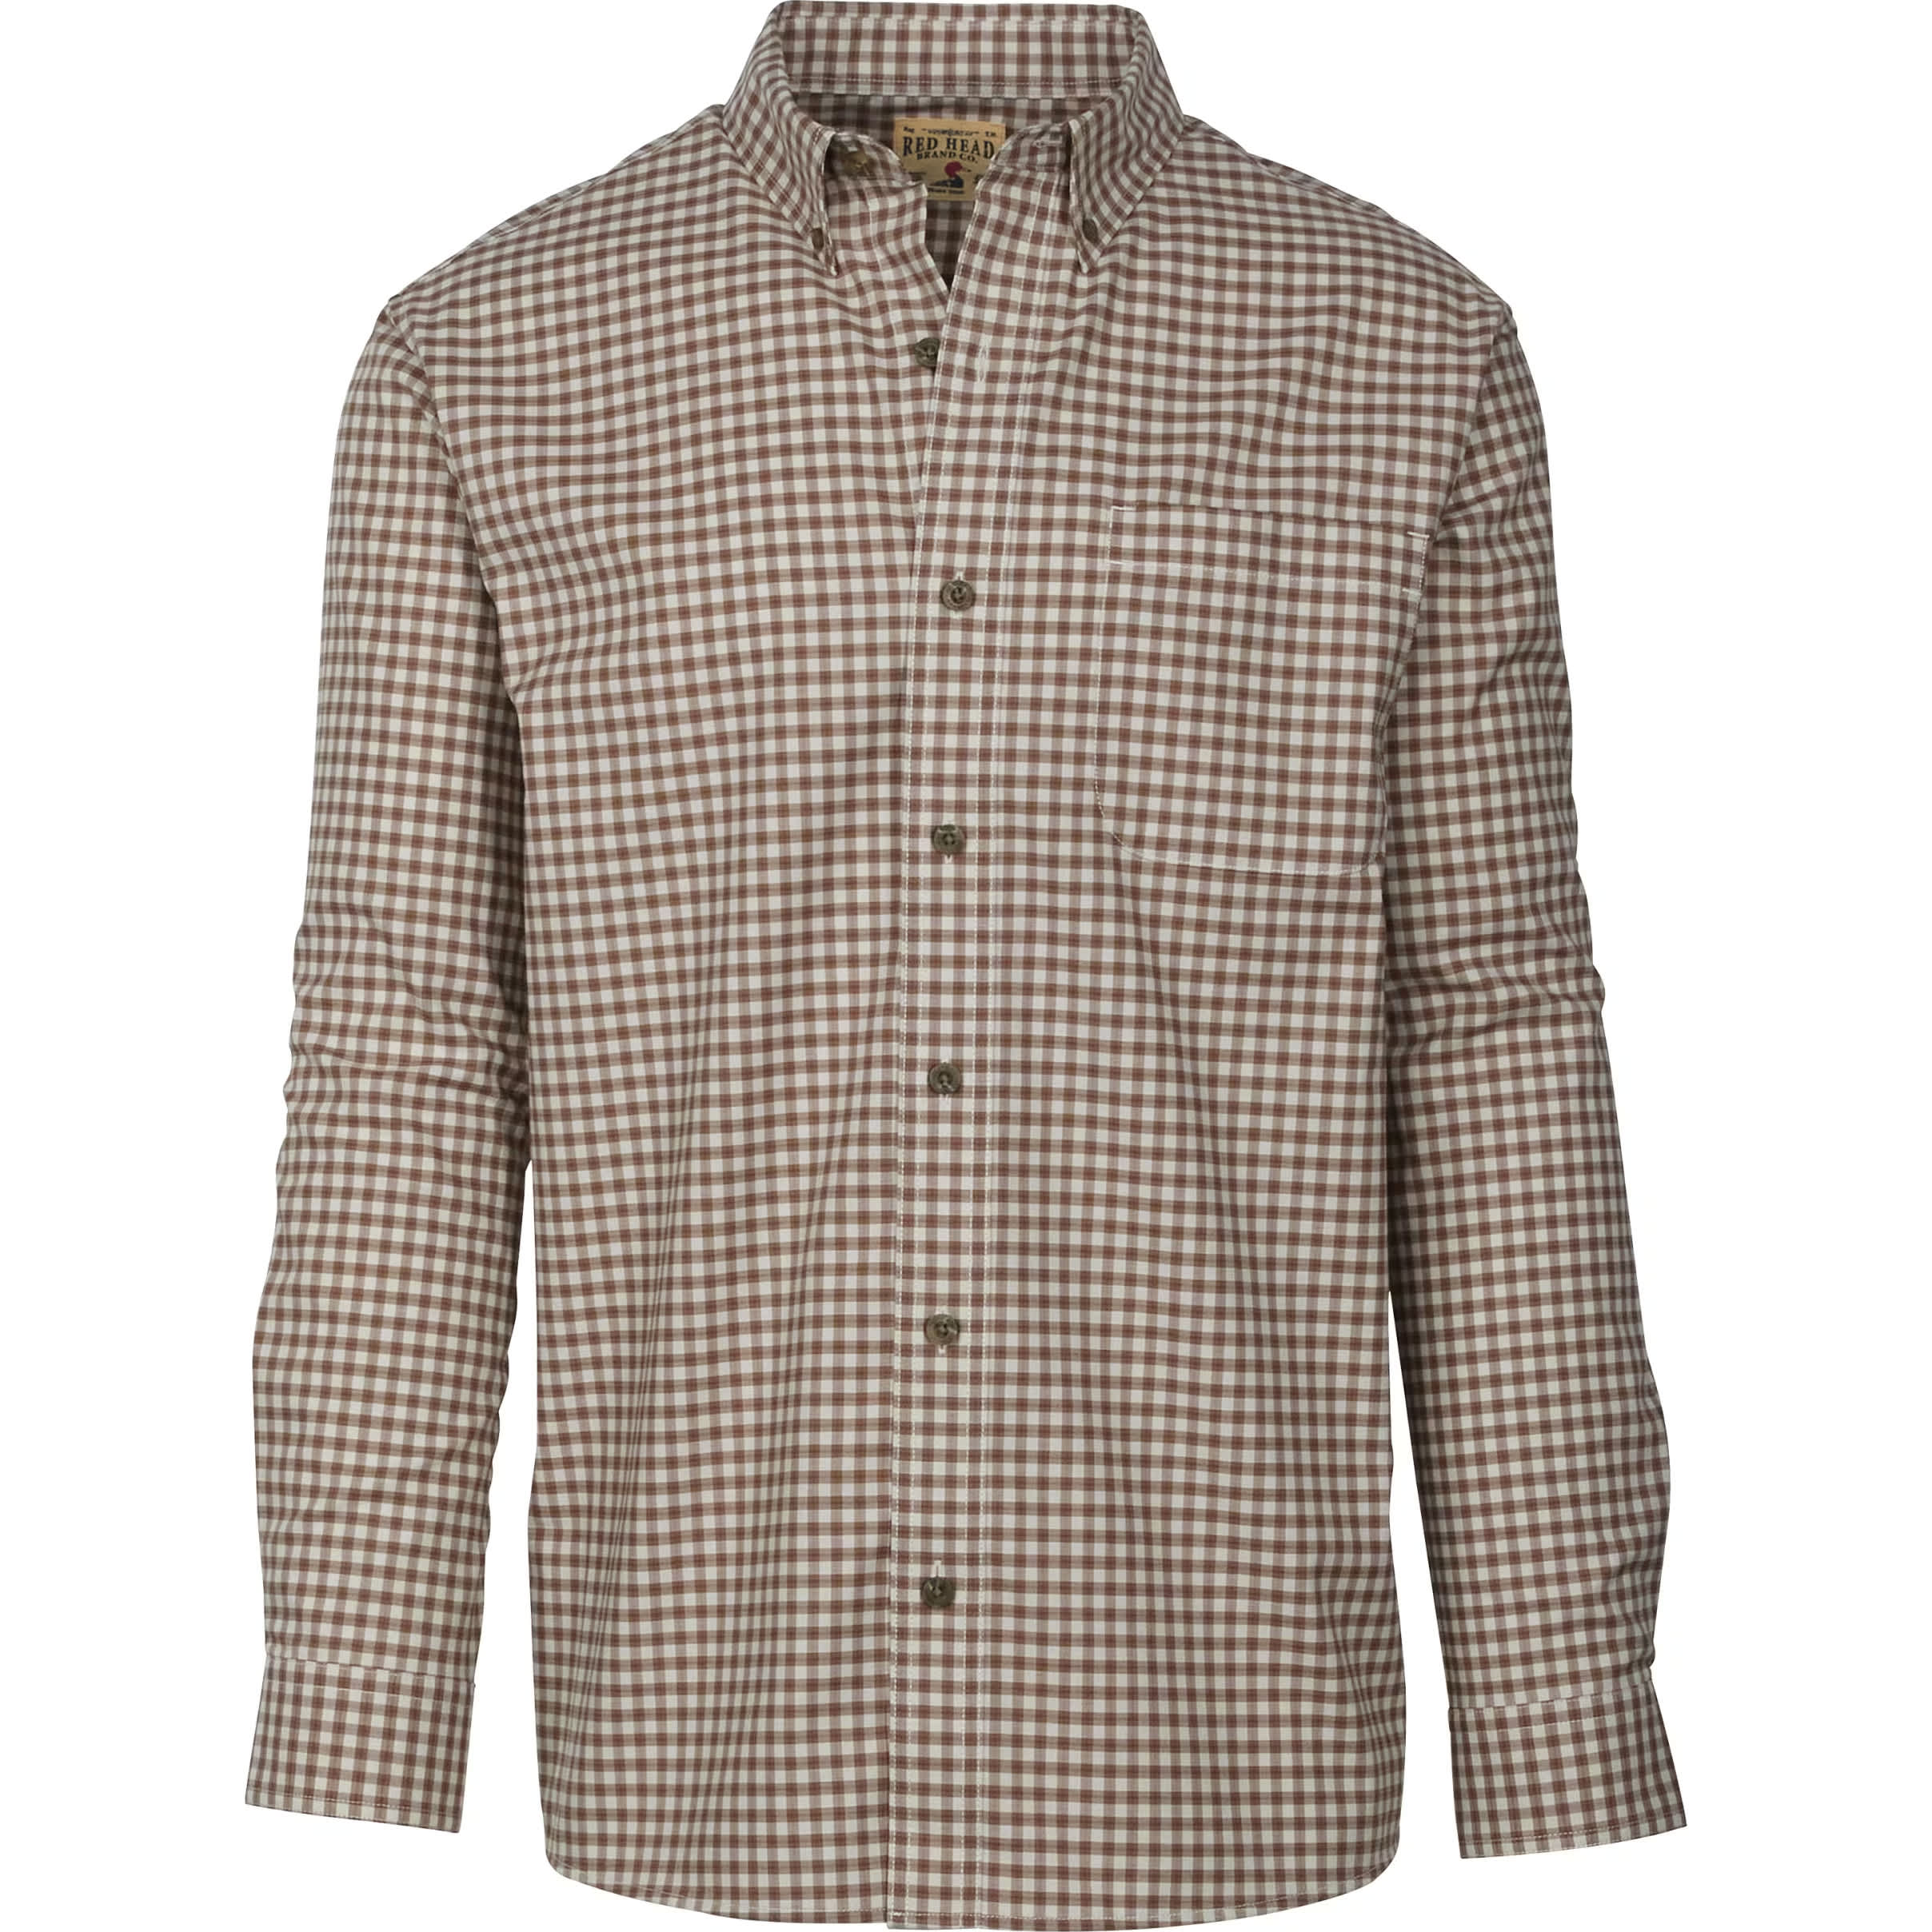 RedHead® Men's Ultimate Flannel Shirt